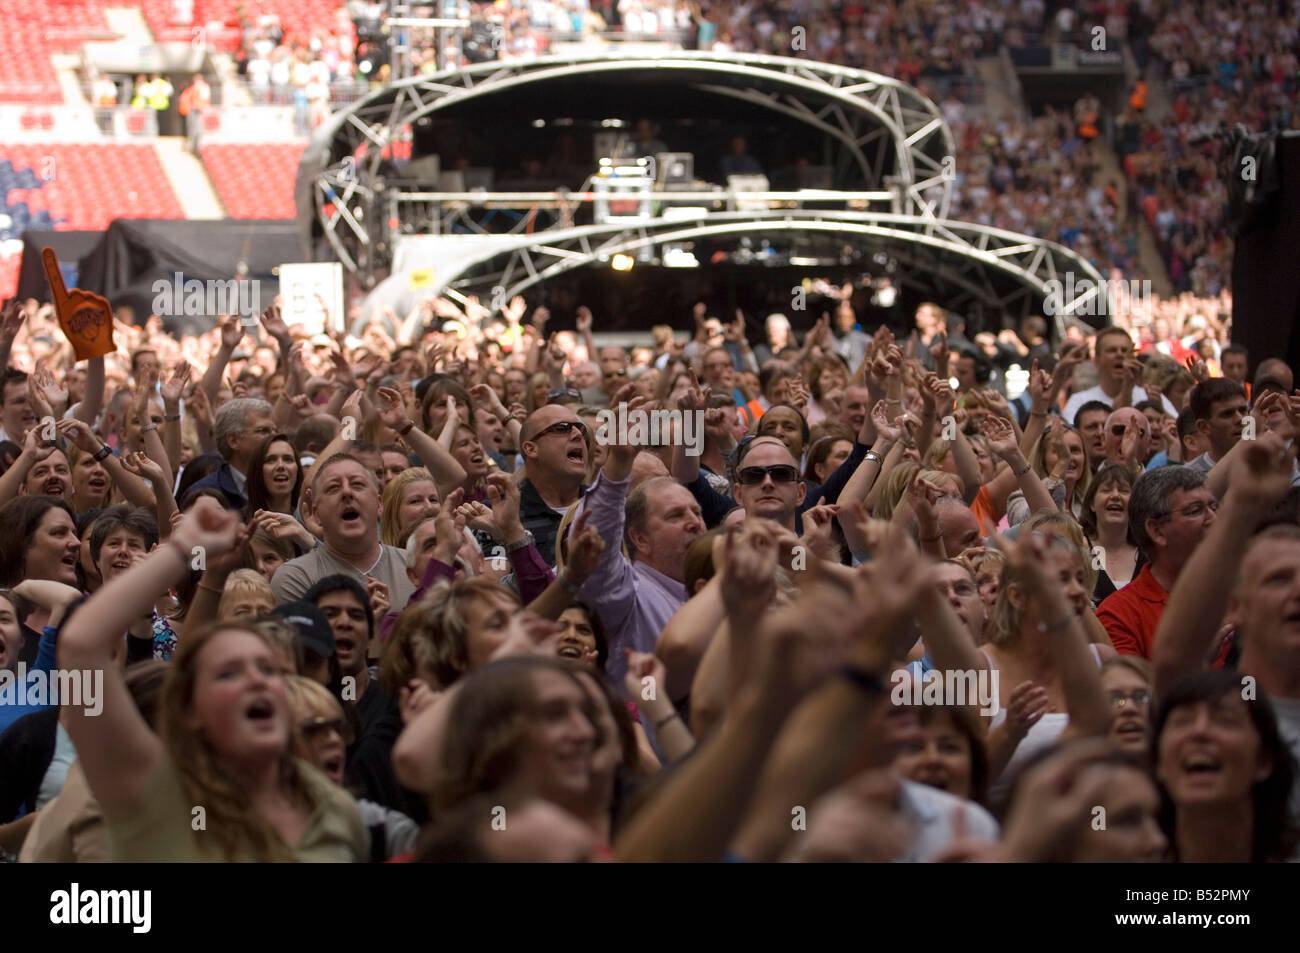 The Princess Diana Memorial concert at wembley stadium today crowd preforming at the concert today. Stock Photo